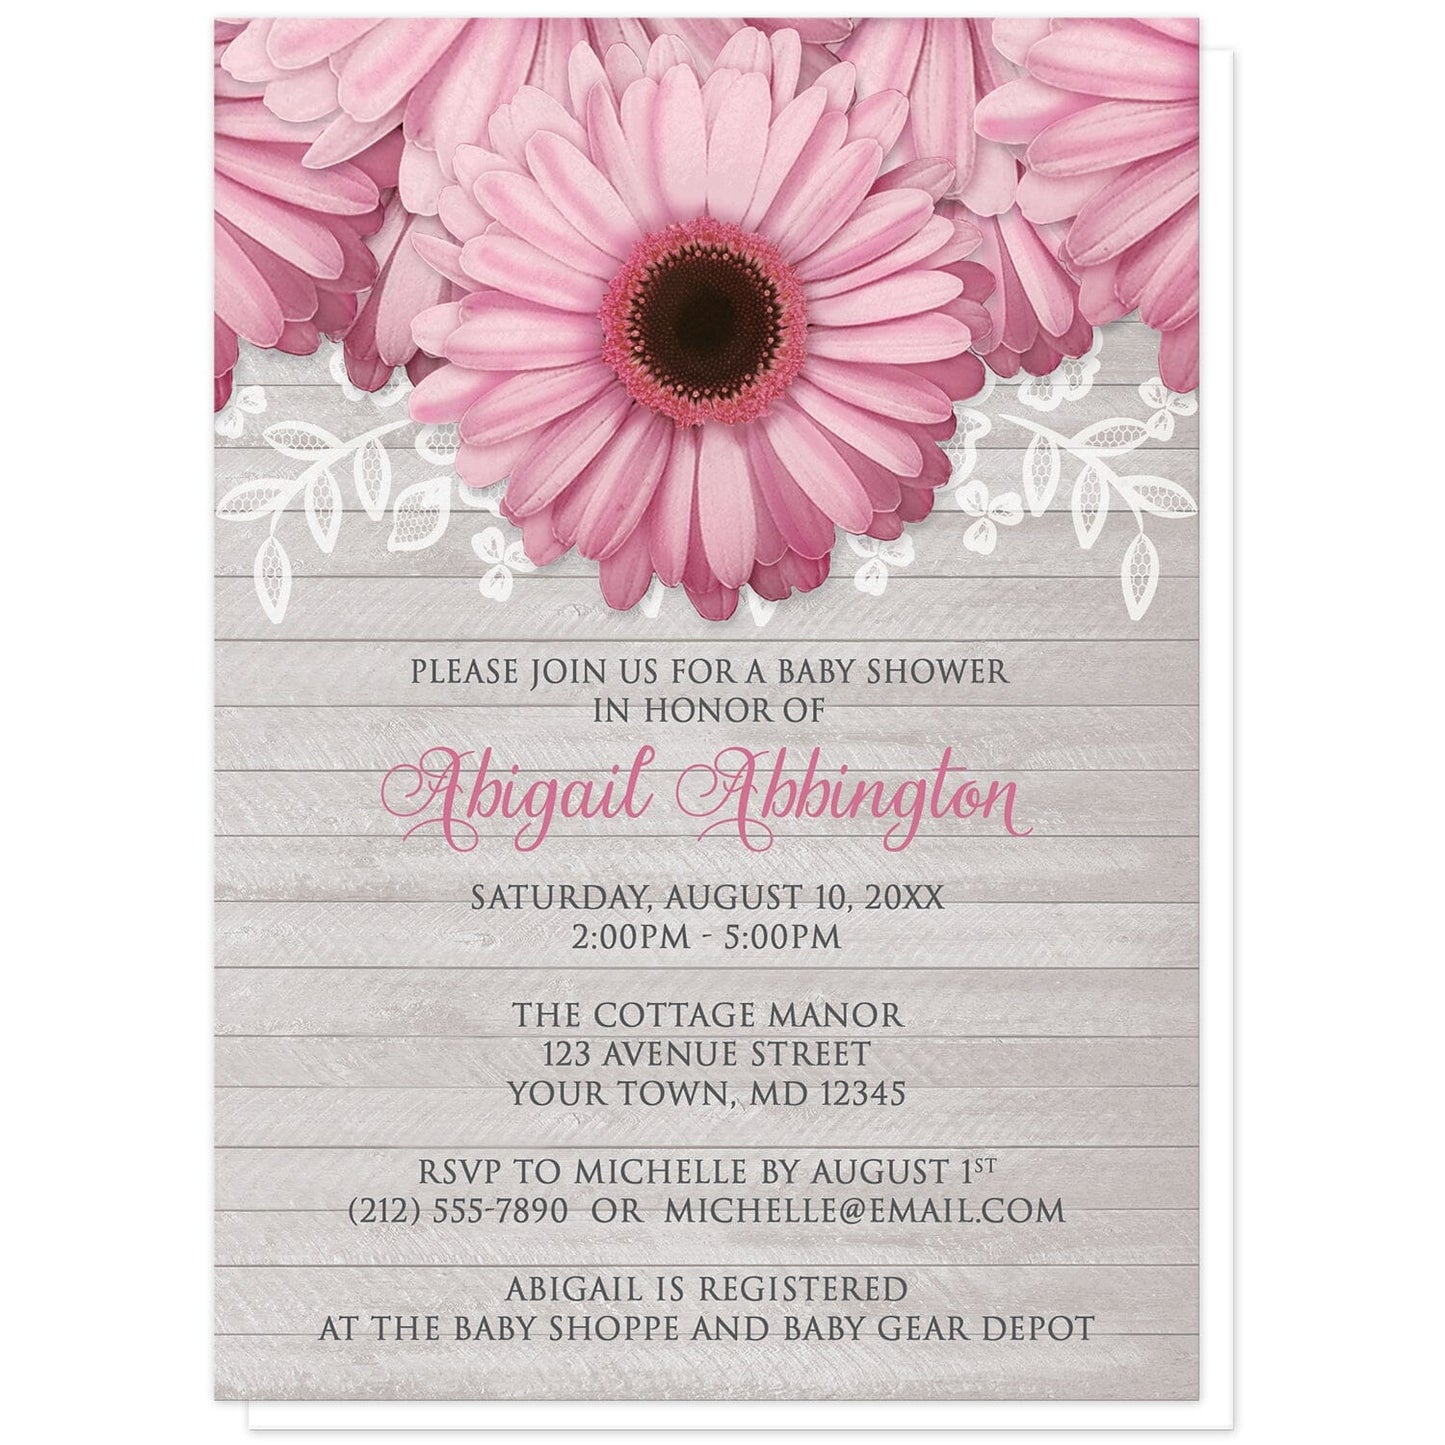 Rustic Pink Daisy Gray Wood Baby Shower Invitations at Artistically Invited. Rustic pink daisy gray wood baby shower invitations designed with large and lovely pink daisy flowers with a white lace overlay along the top over a light gray wood background illustration. Your personalized baby shower celebration details are custom printed in pink and dark gray over the wood background design below the pretty pink daisies.